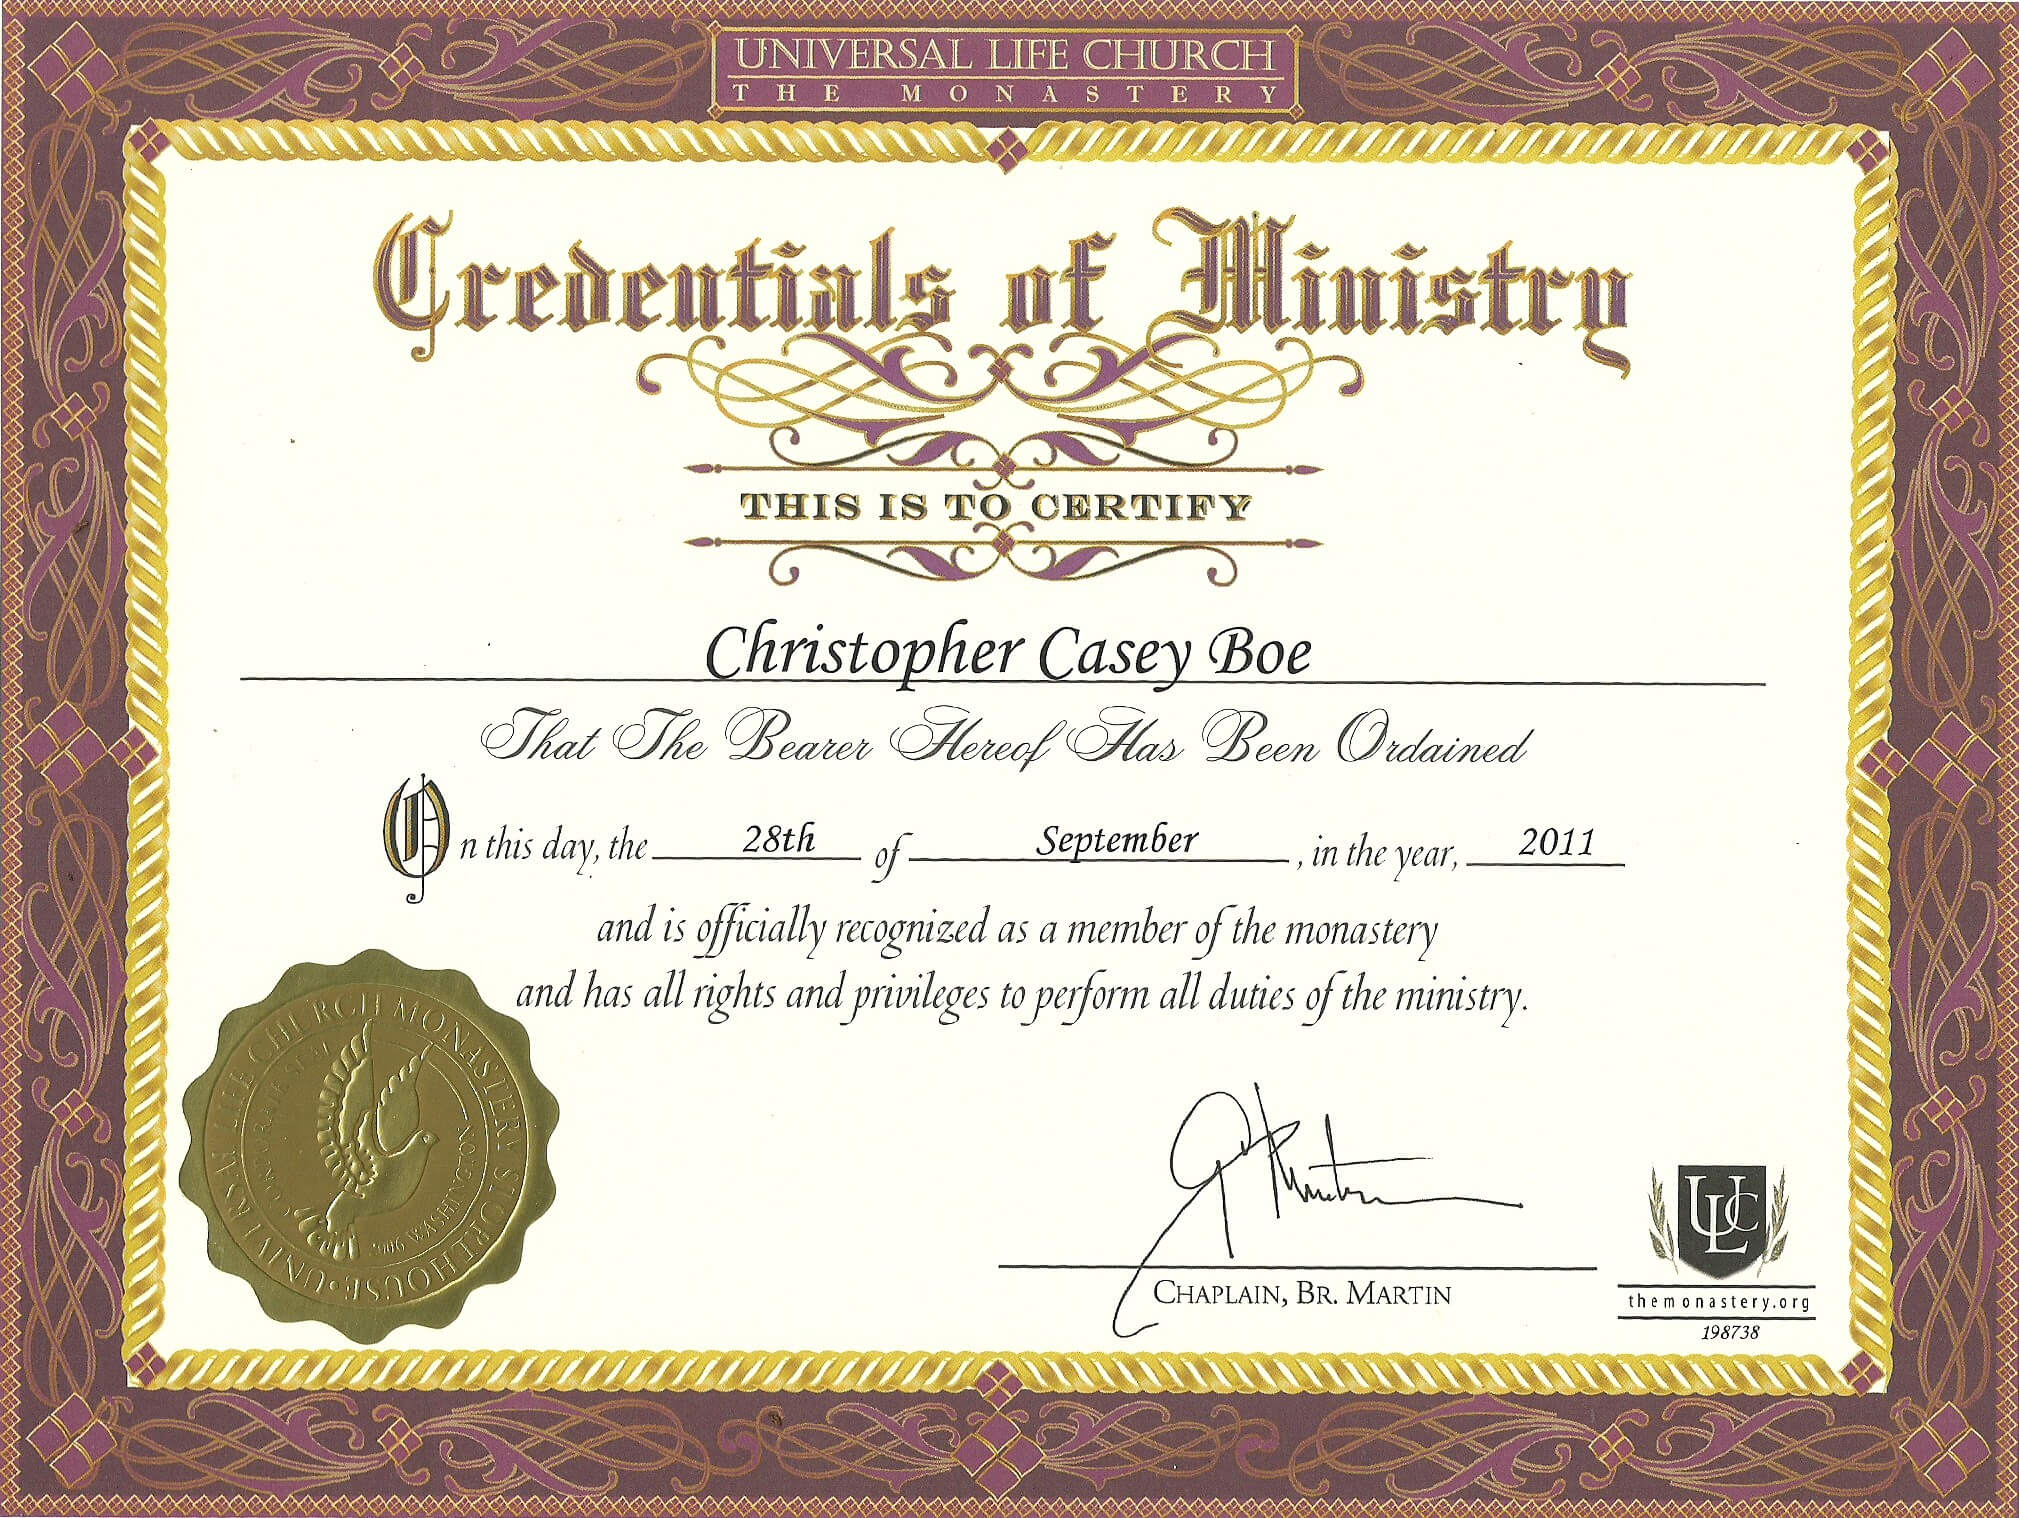 Certificate Of Ordination For Deaconess Example Throughout Certificate Of Ordination Template